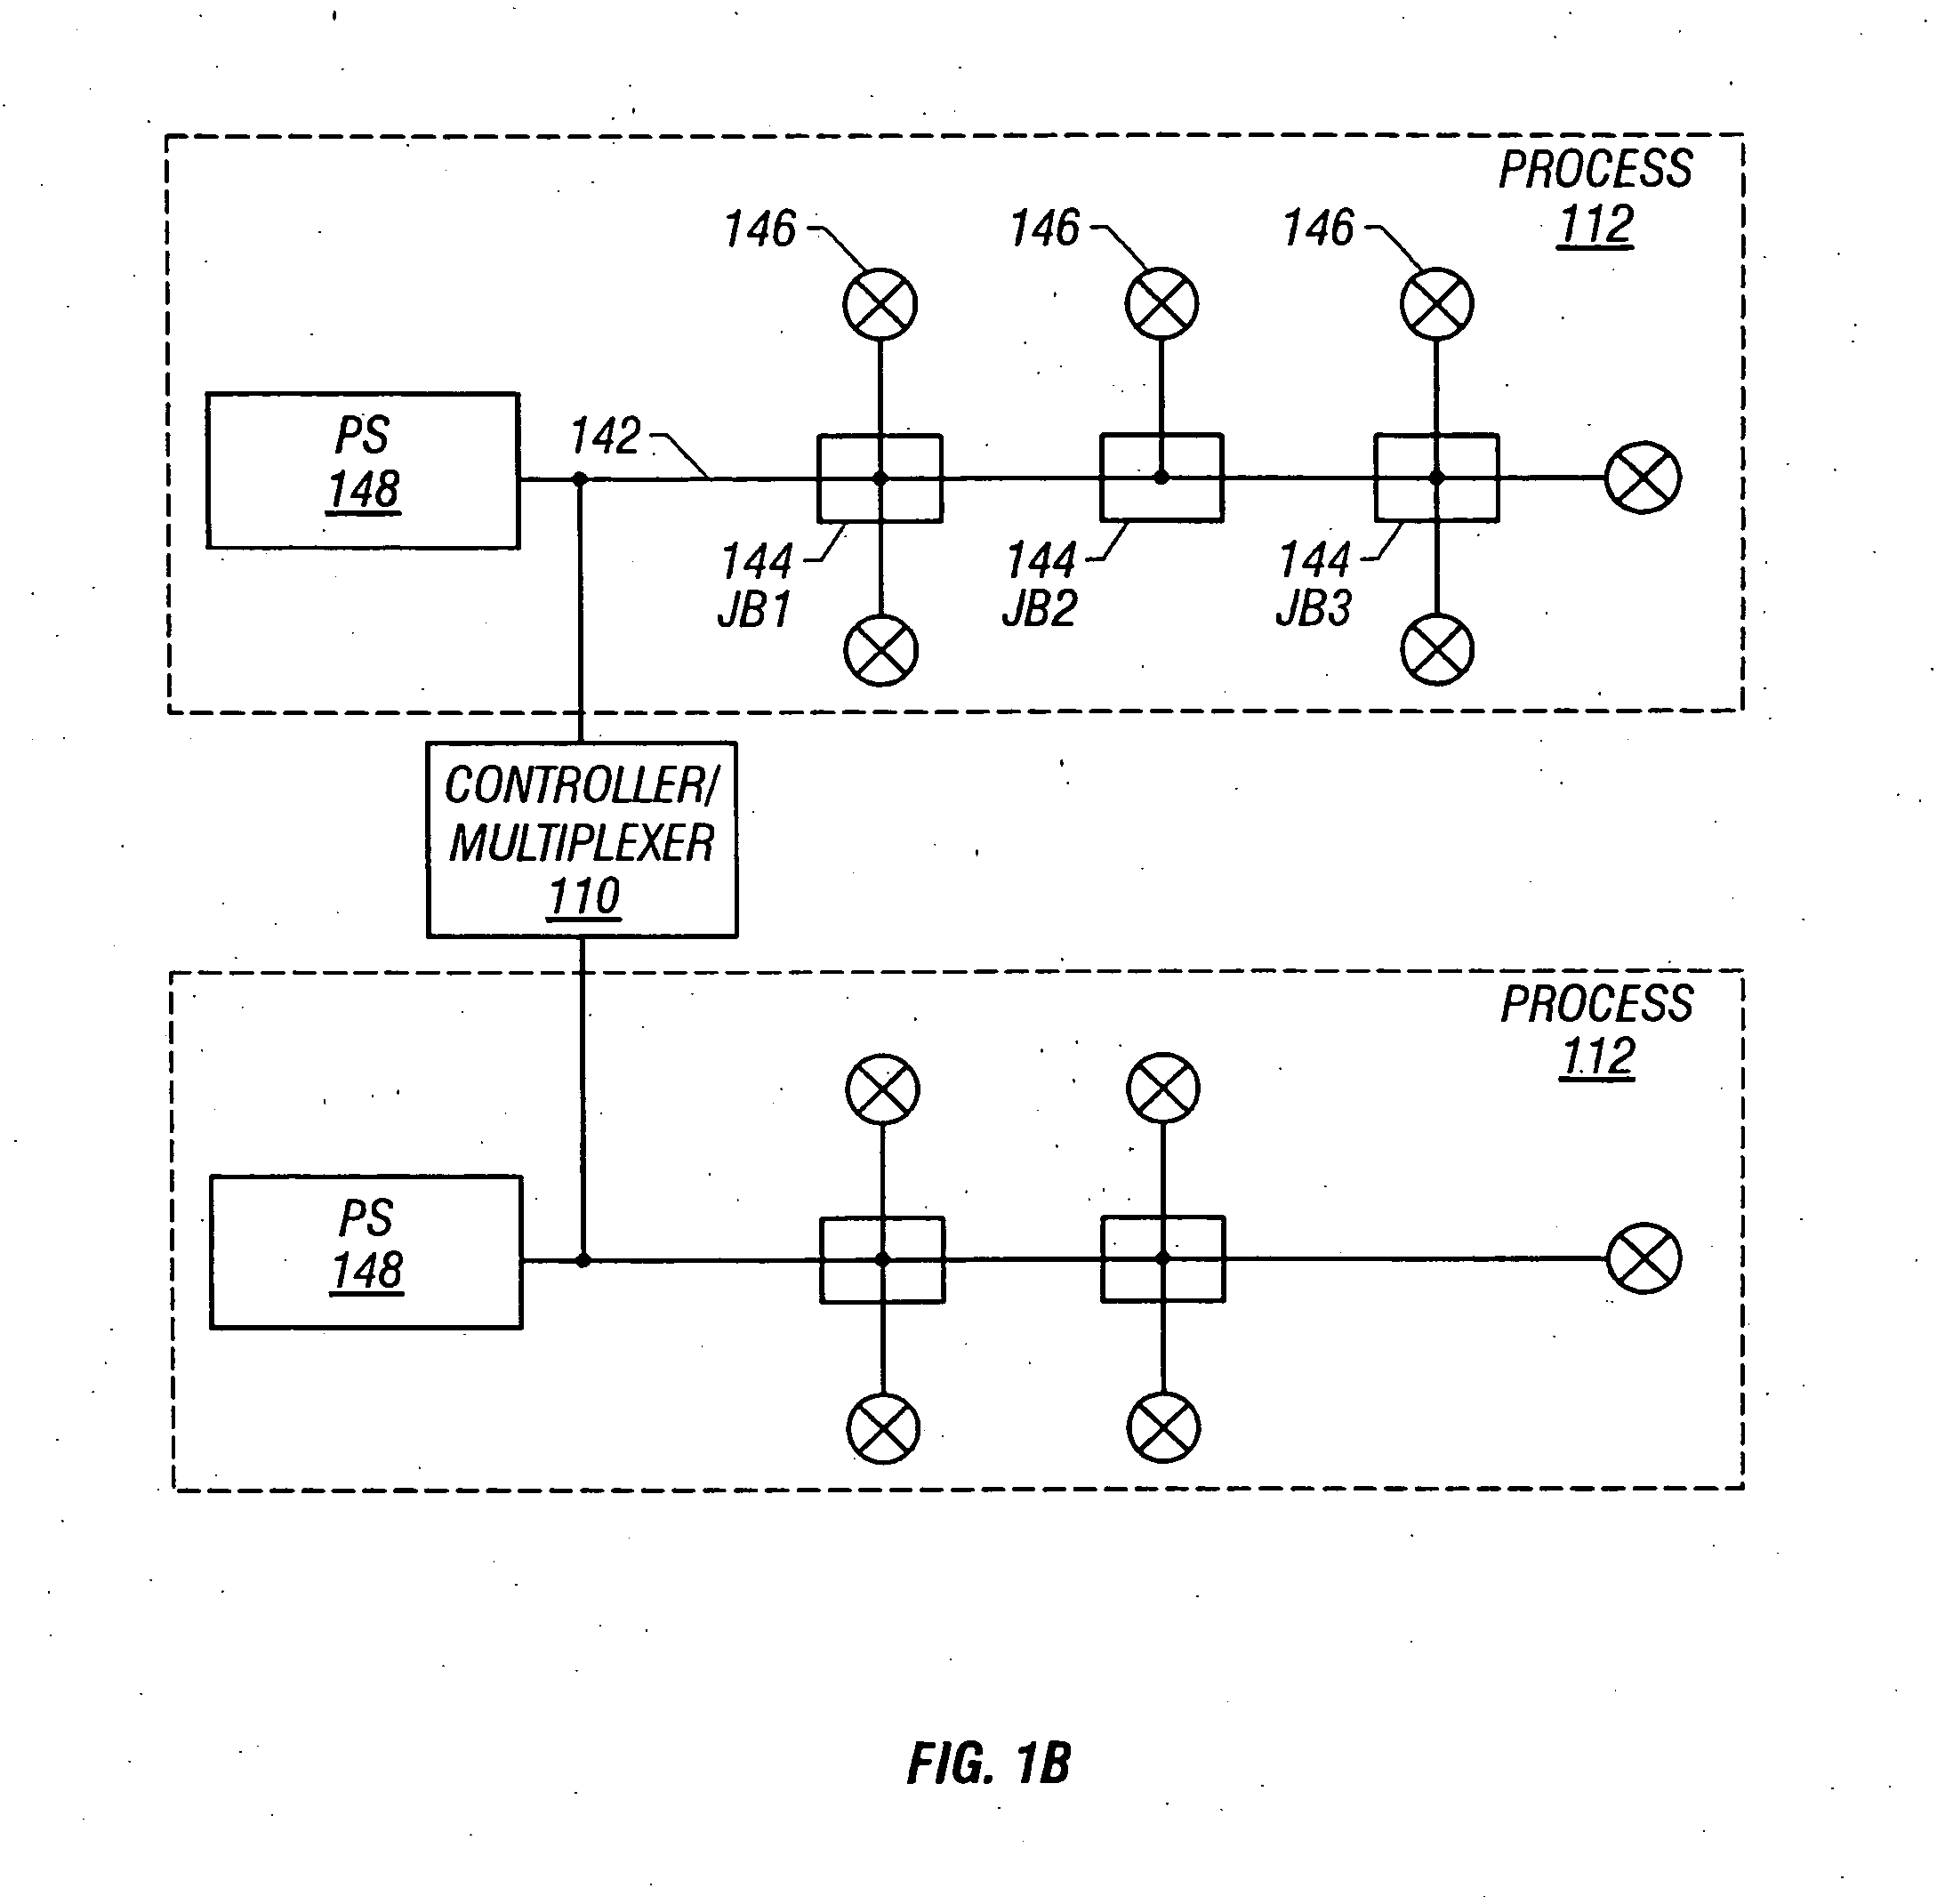 Tool for configuring and managing a process control network including the use of spatial information